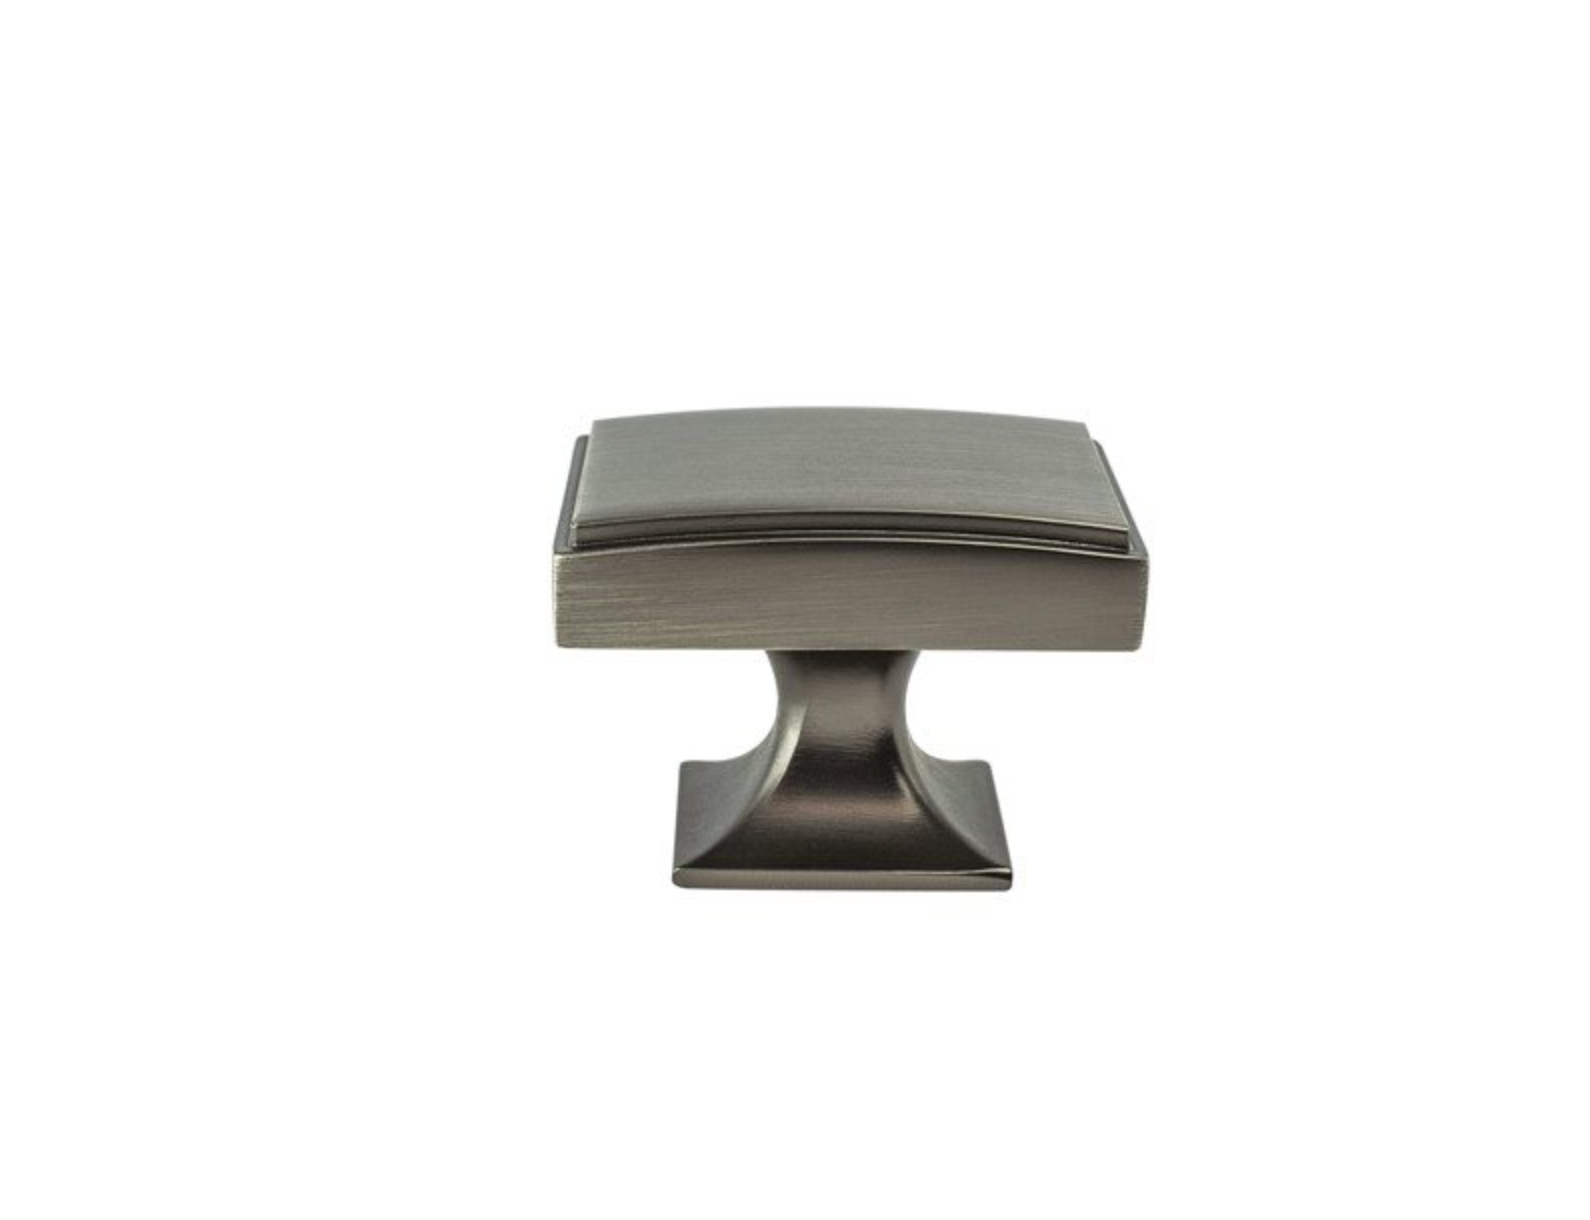 Brushed Dark Gray "Liana" Drawer Pulls and Knobs for Cabinets and Furniture - Industry Hardware